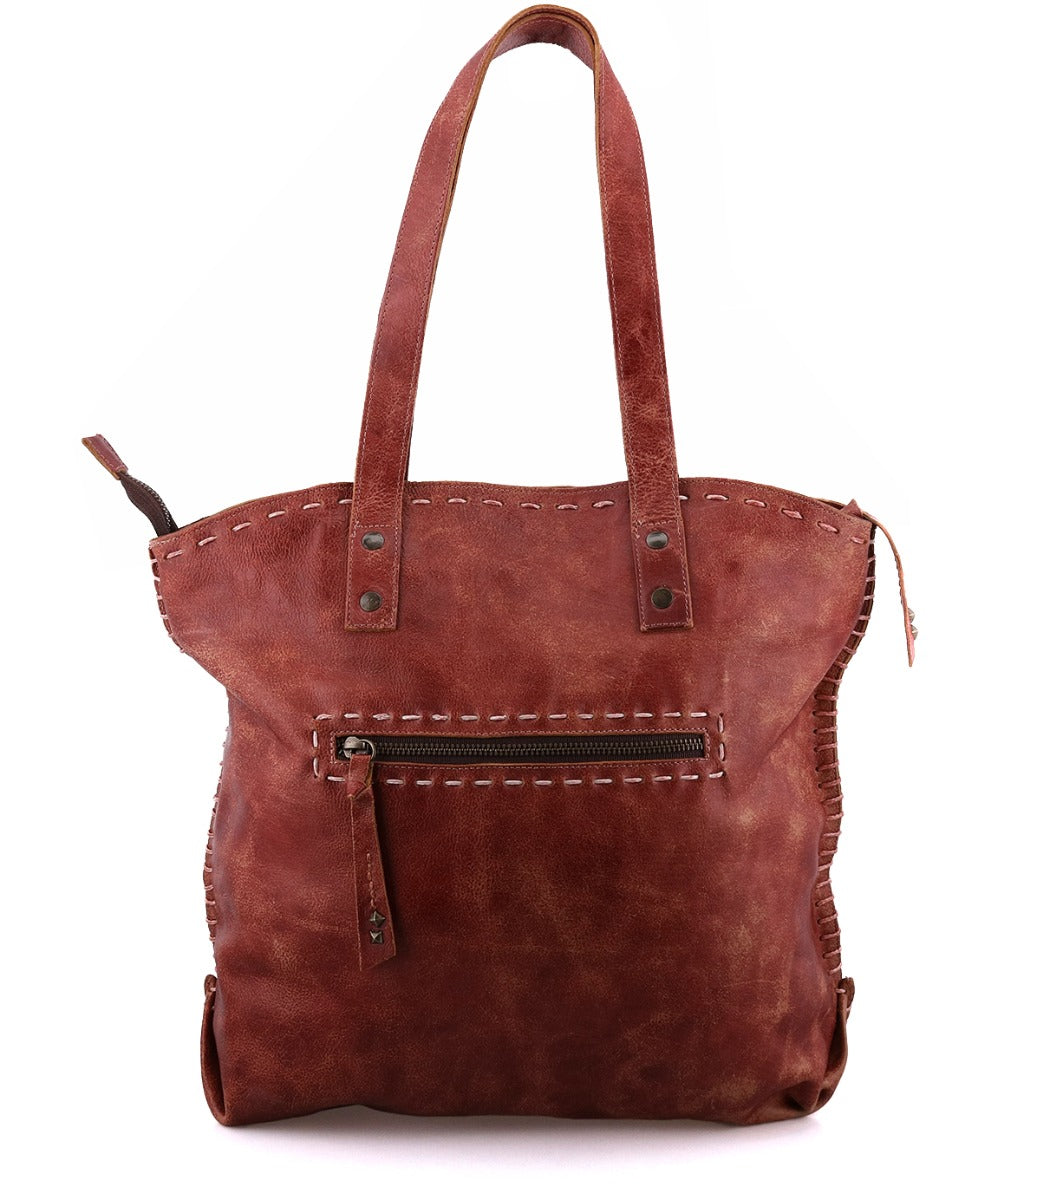 A leather Skye II tote bag by Bed Stu with zippers.